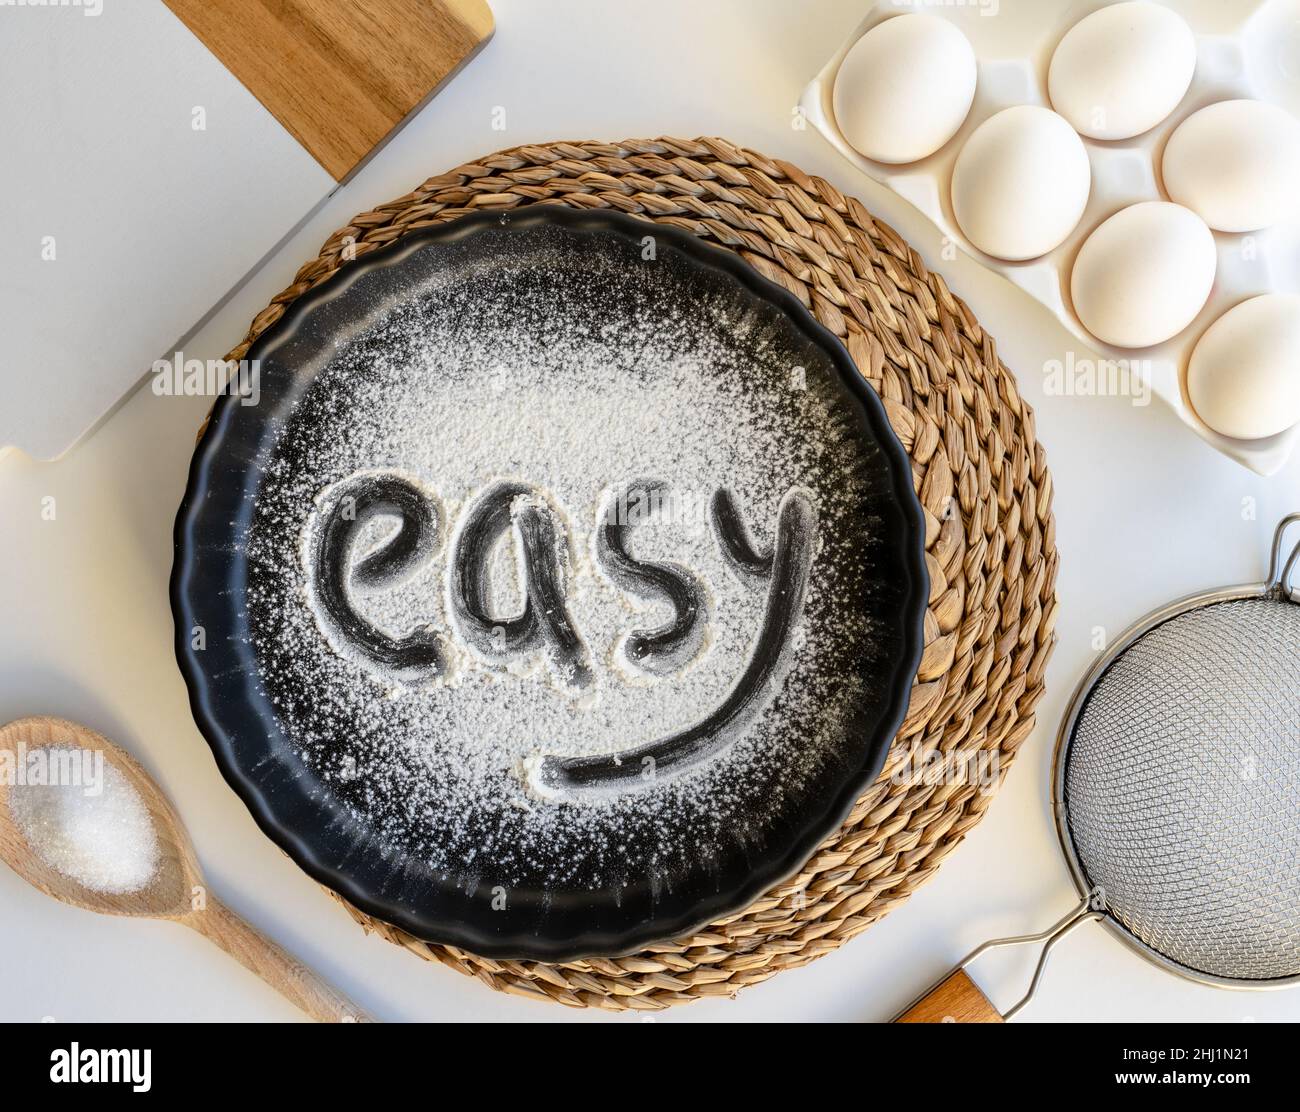 Ingredients for baking and kitchen utensils, easy to cook Stock Photo